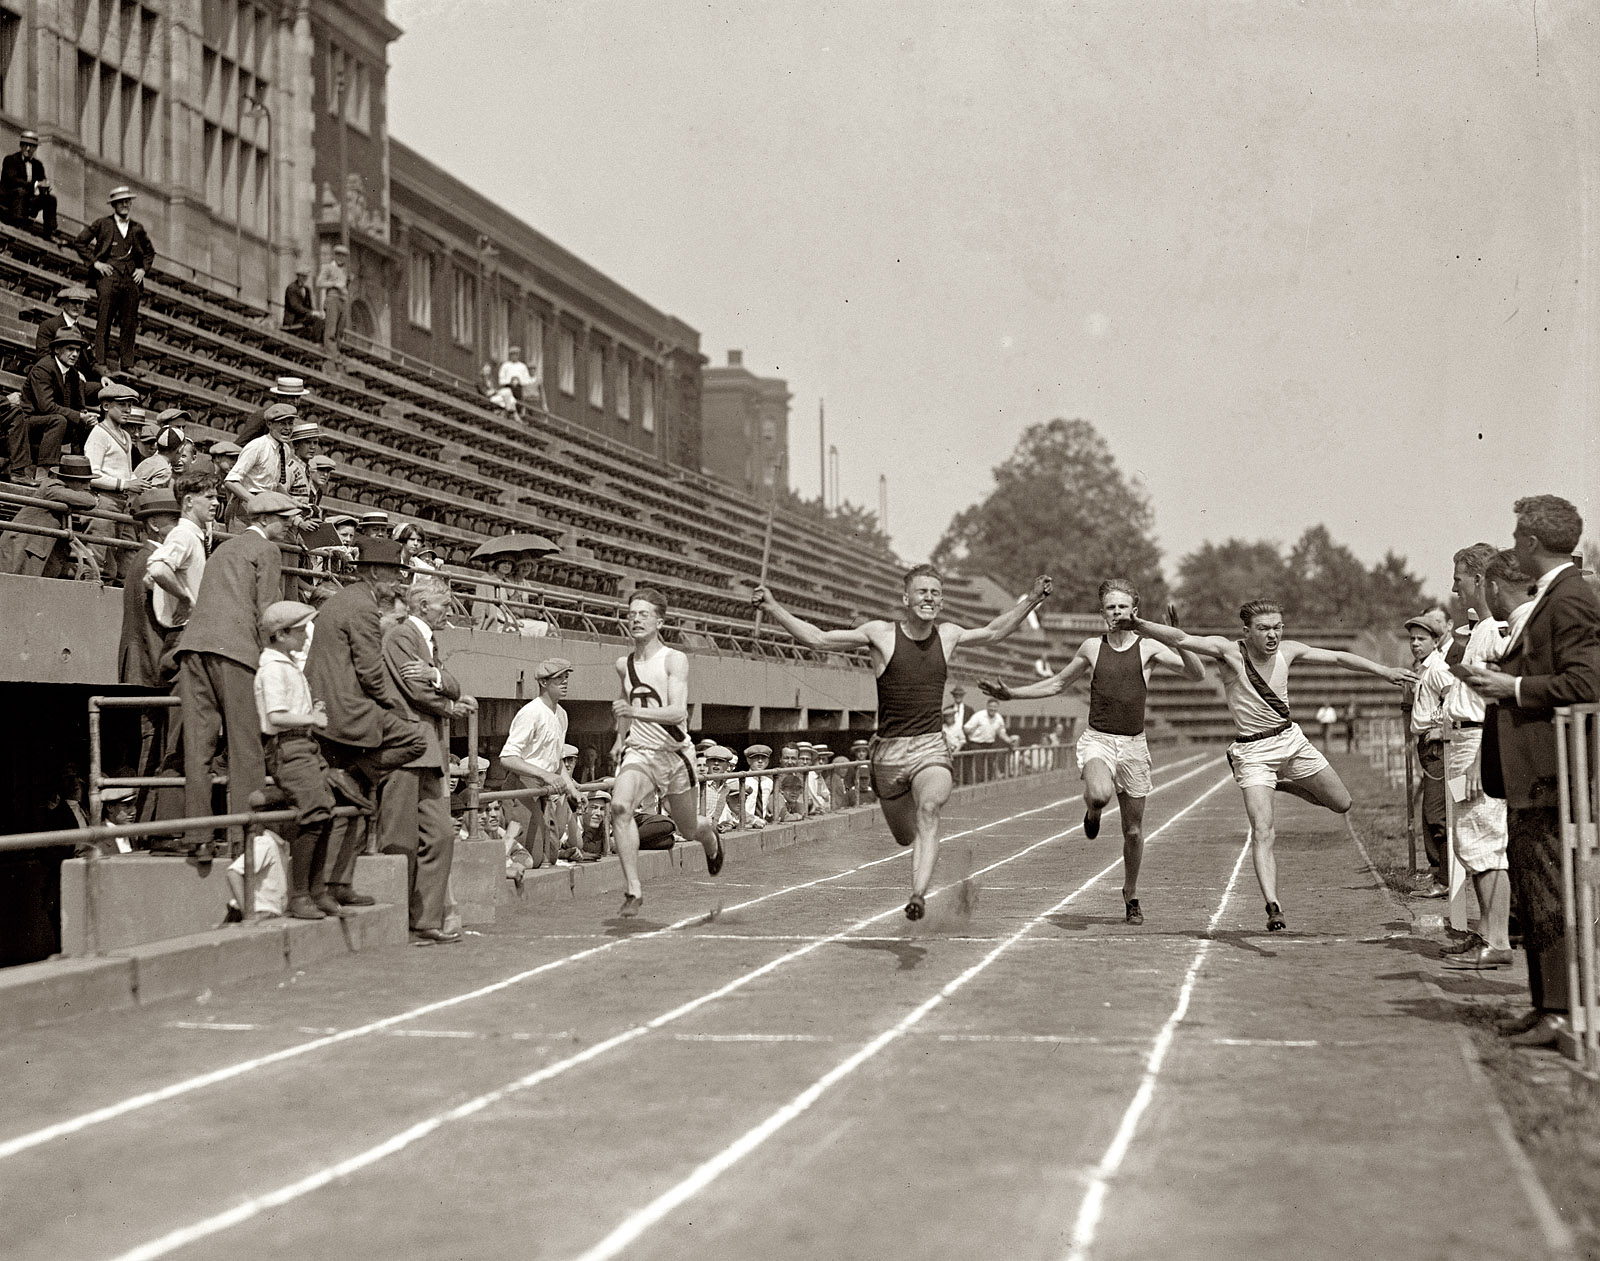 1925. Washington, D.C. "High school track meet at Central Stadium." National Photo Company Collection glass negative. View full size.